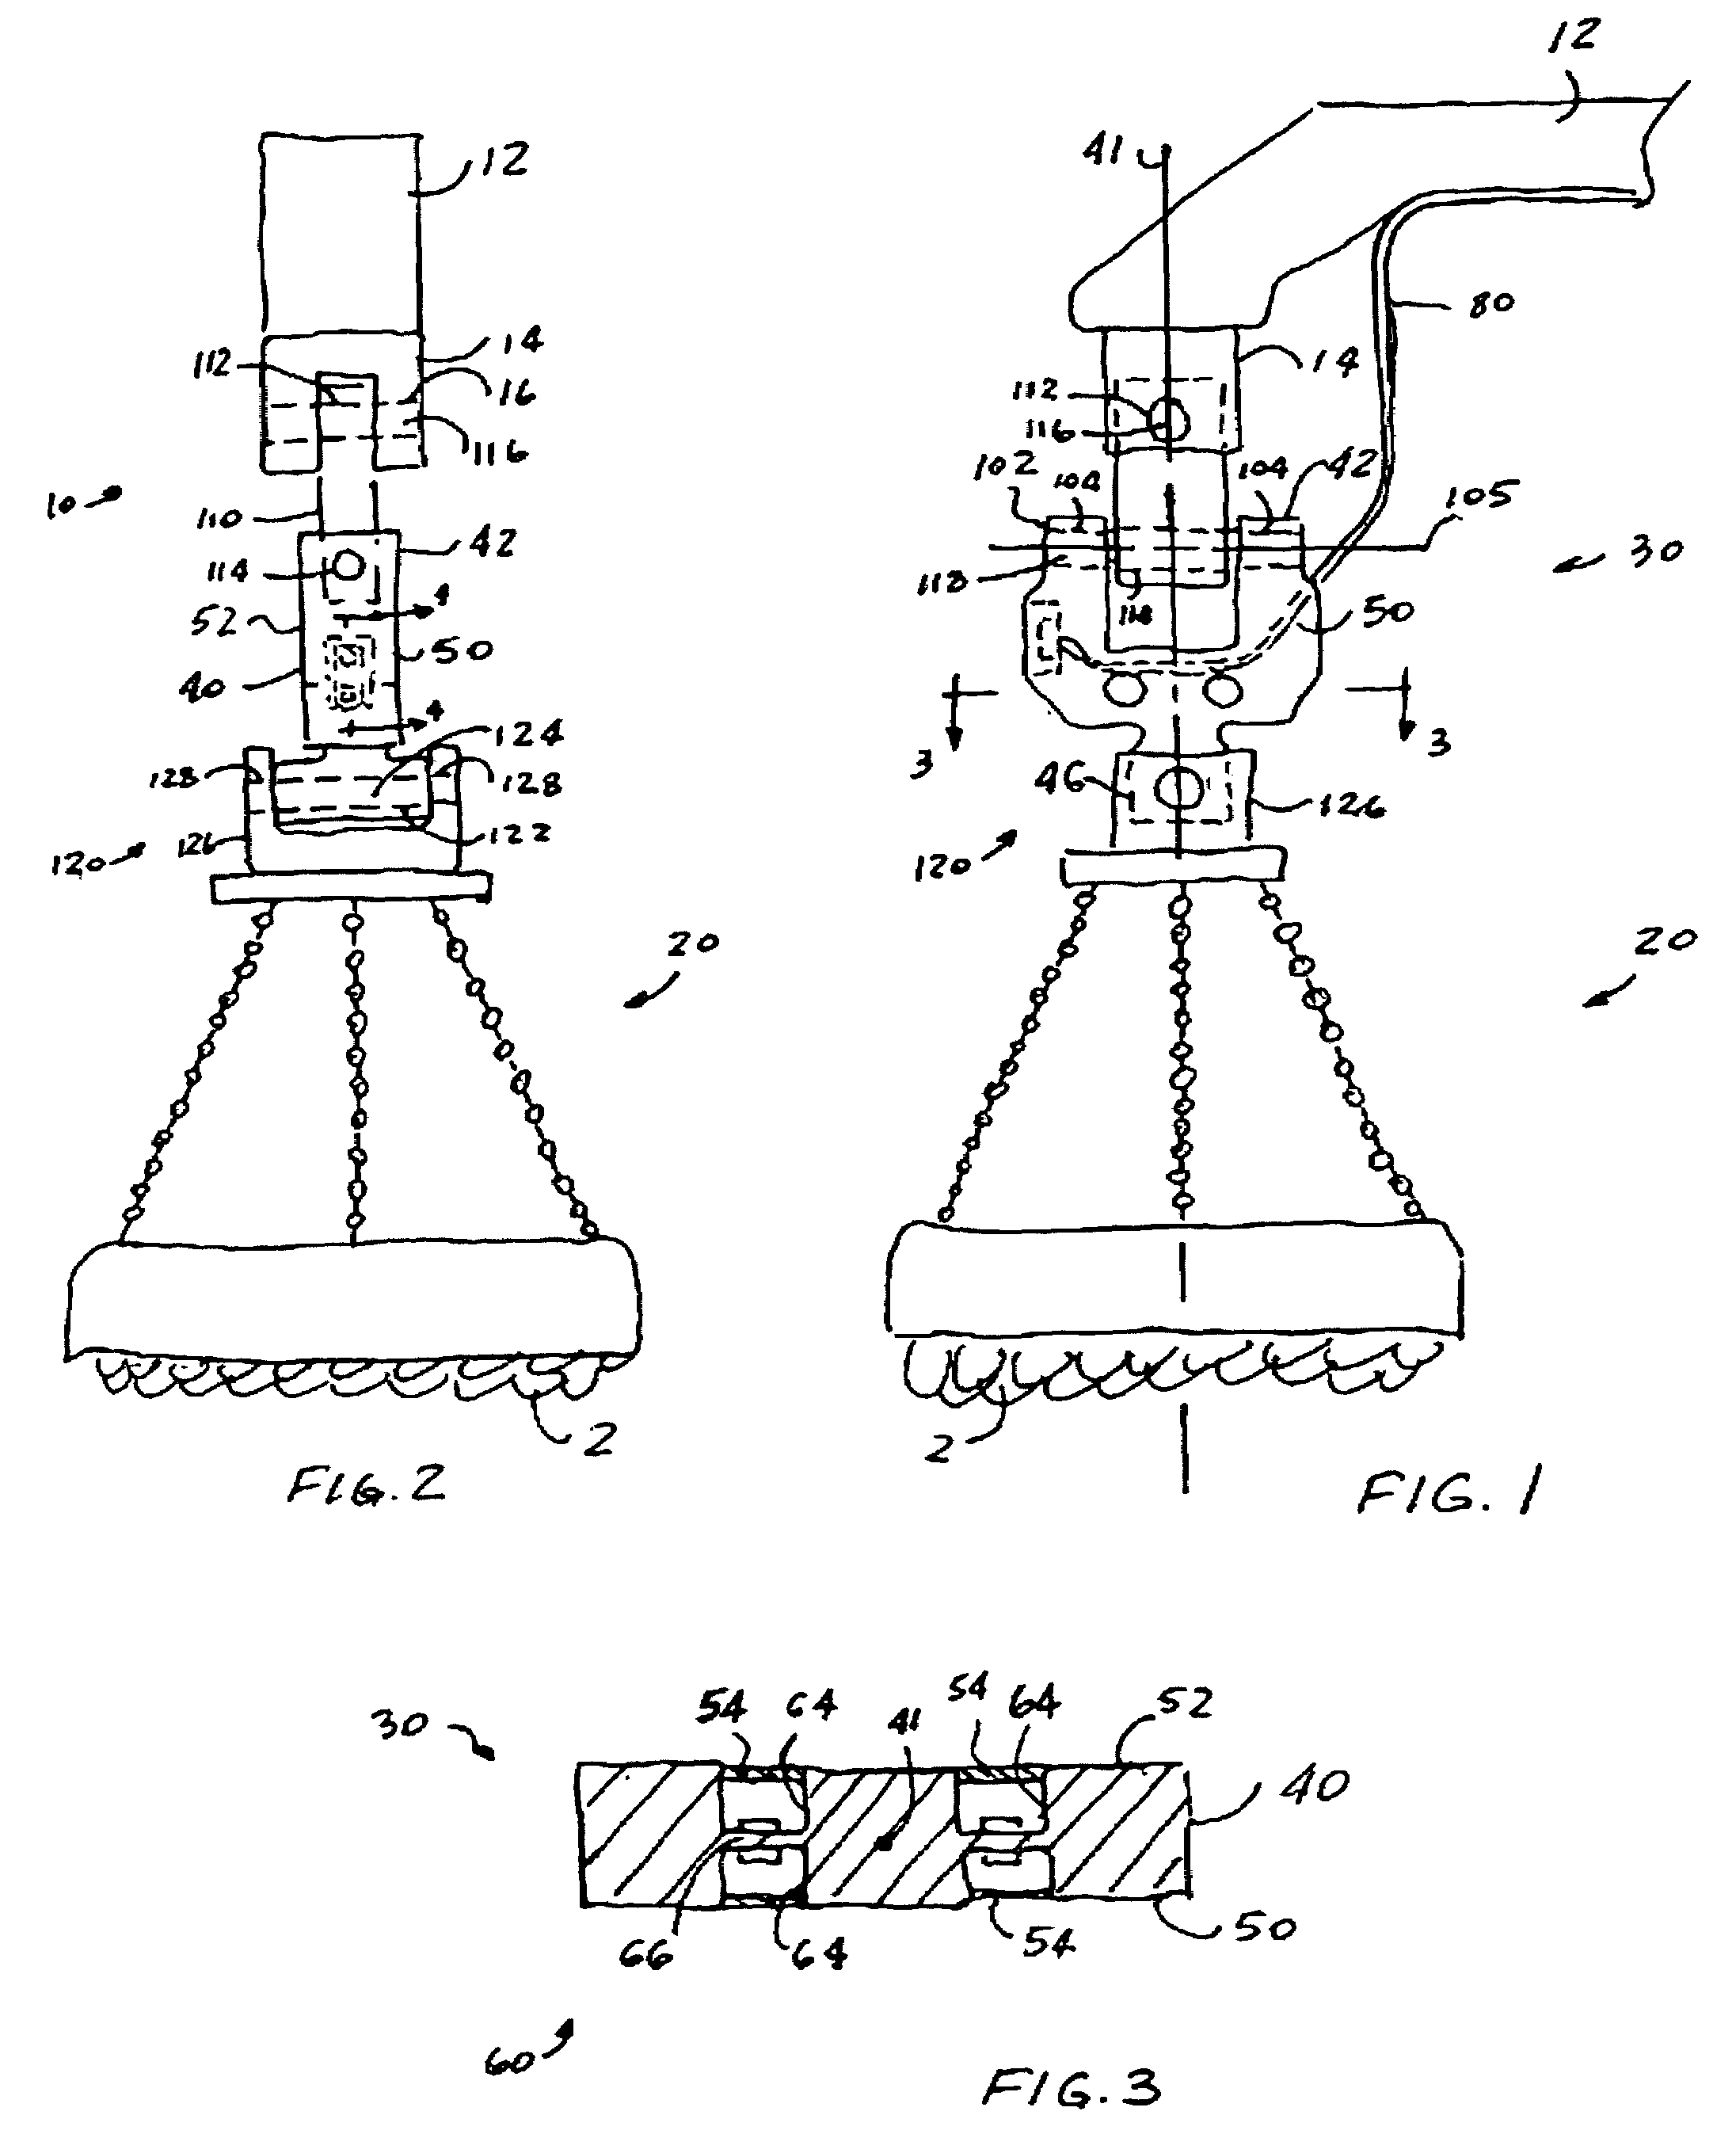 Apparatus, system and method for weighing loads in motion